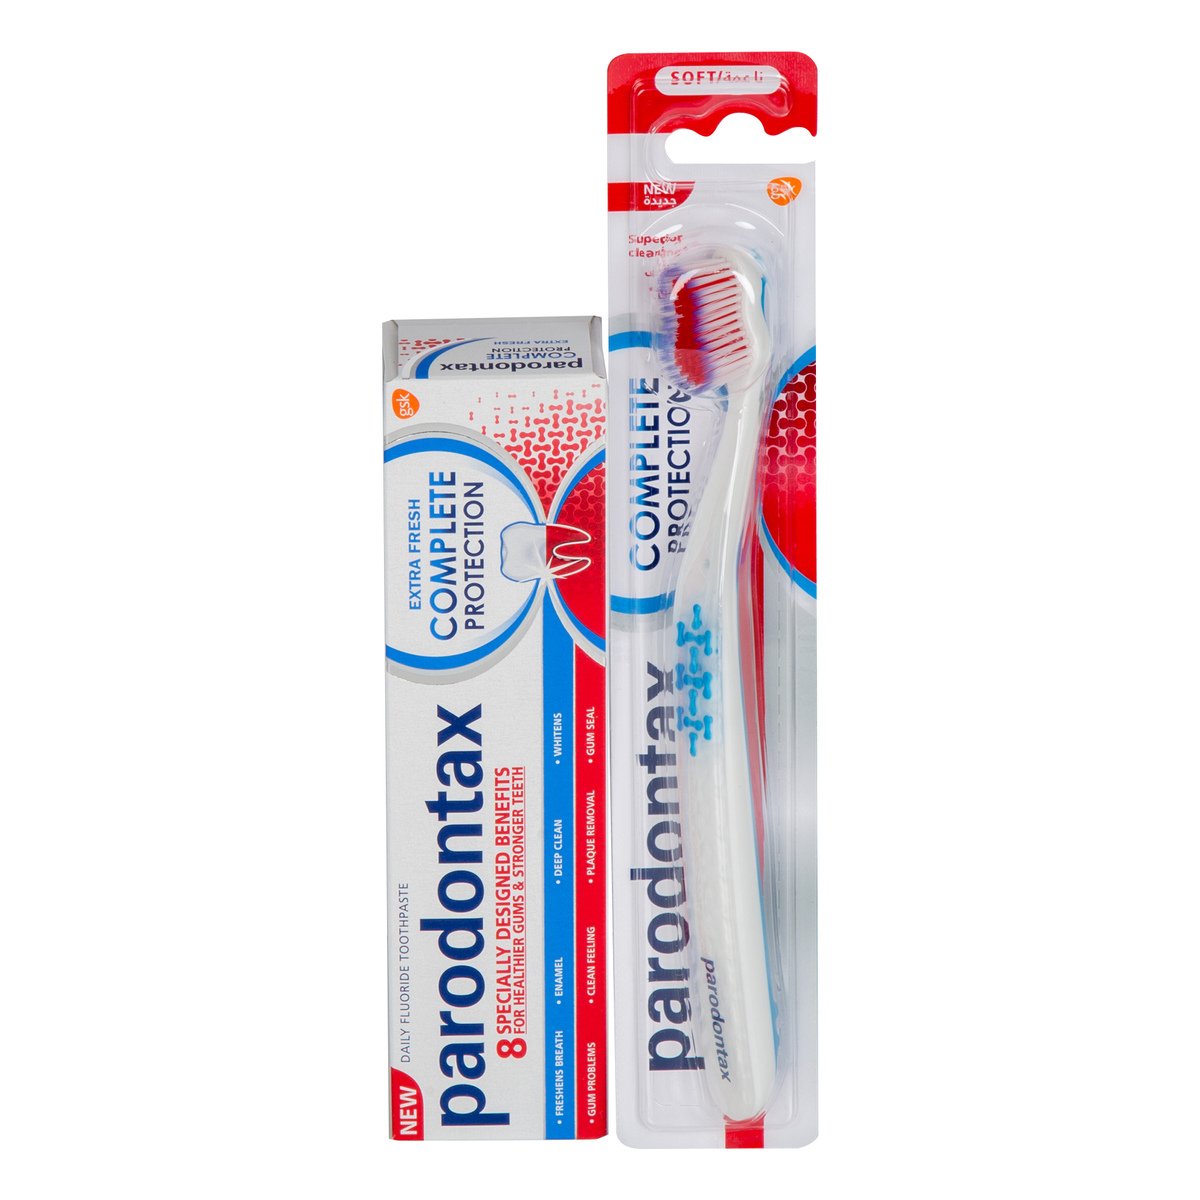 Parodontax Complete Protection Toothpaste Extra Fresh 75 ml + Toothbrush 1 pc